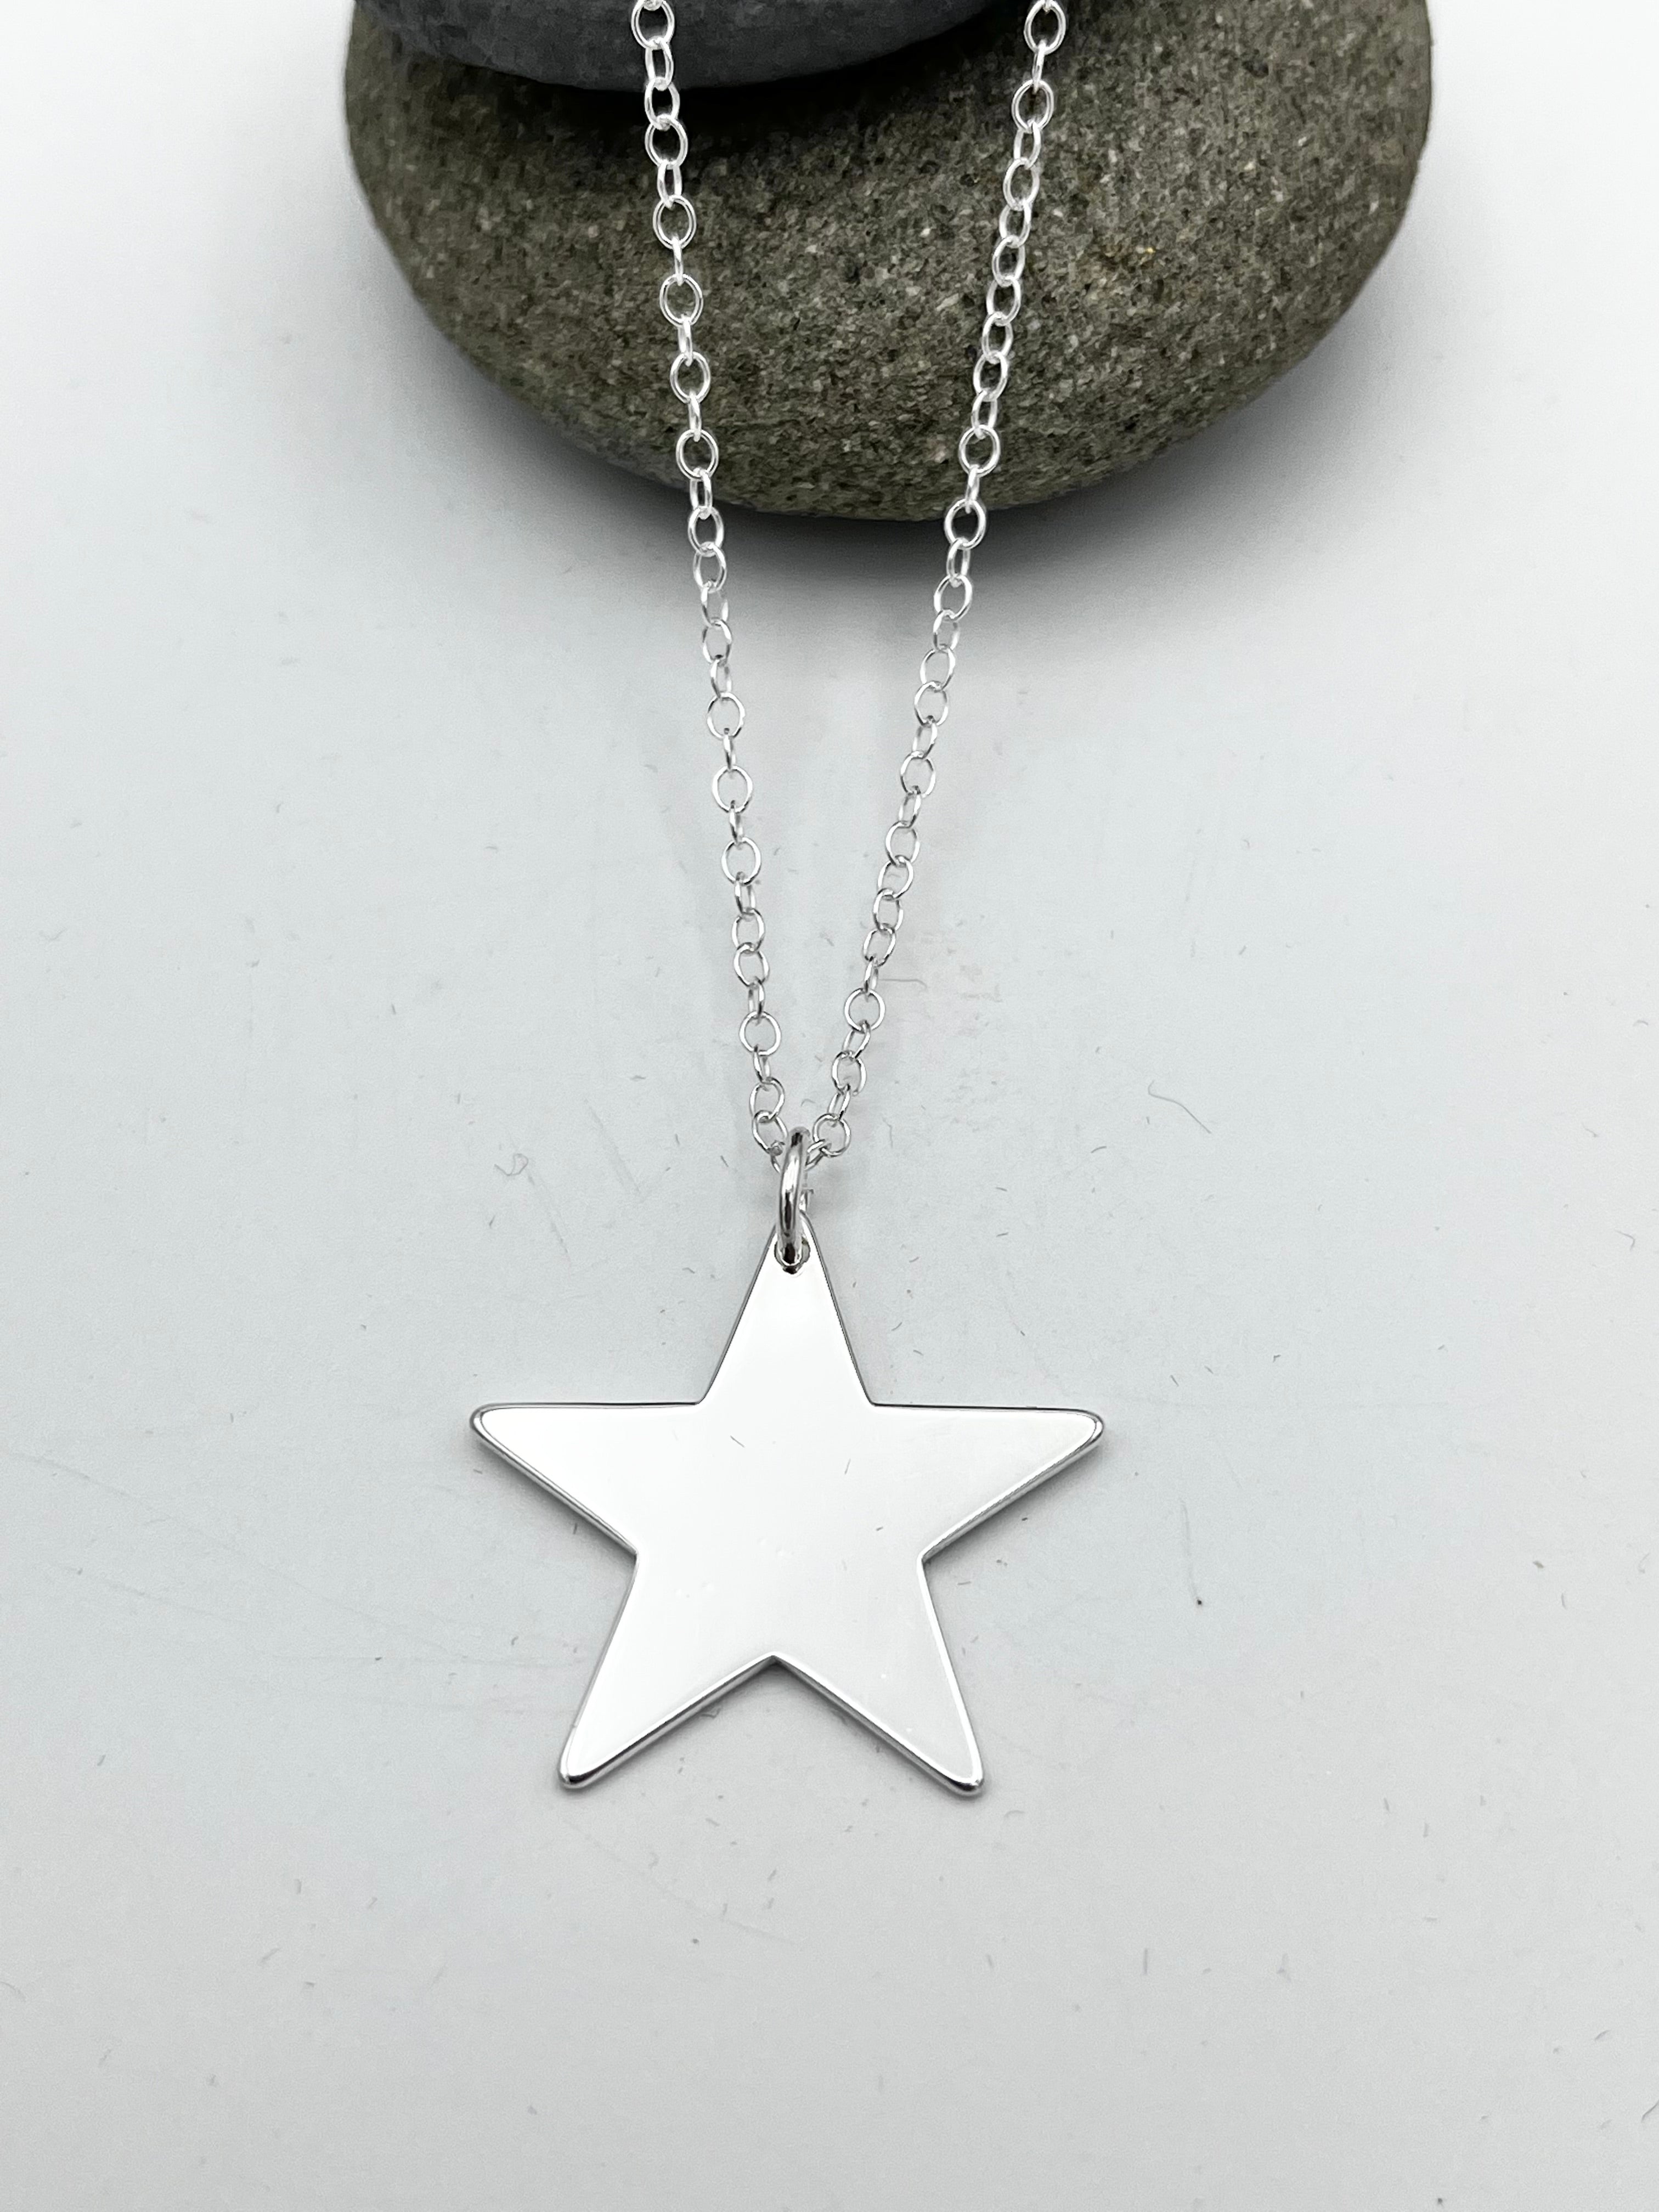 Single Star pendant 25mm wide polished finish on 16" chain